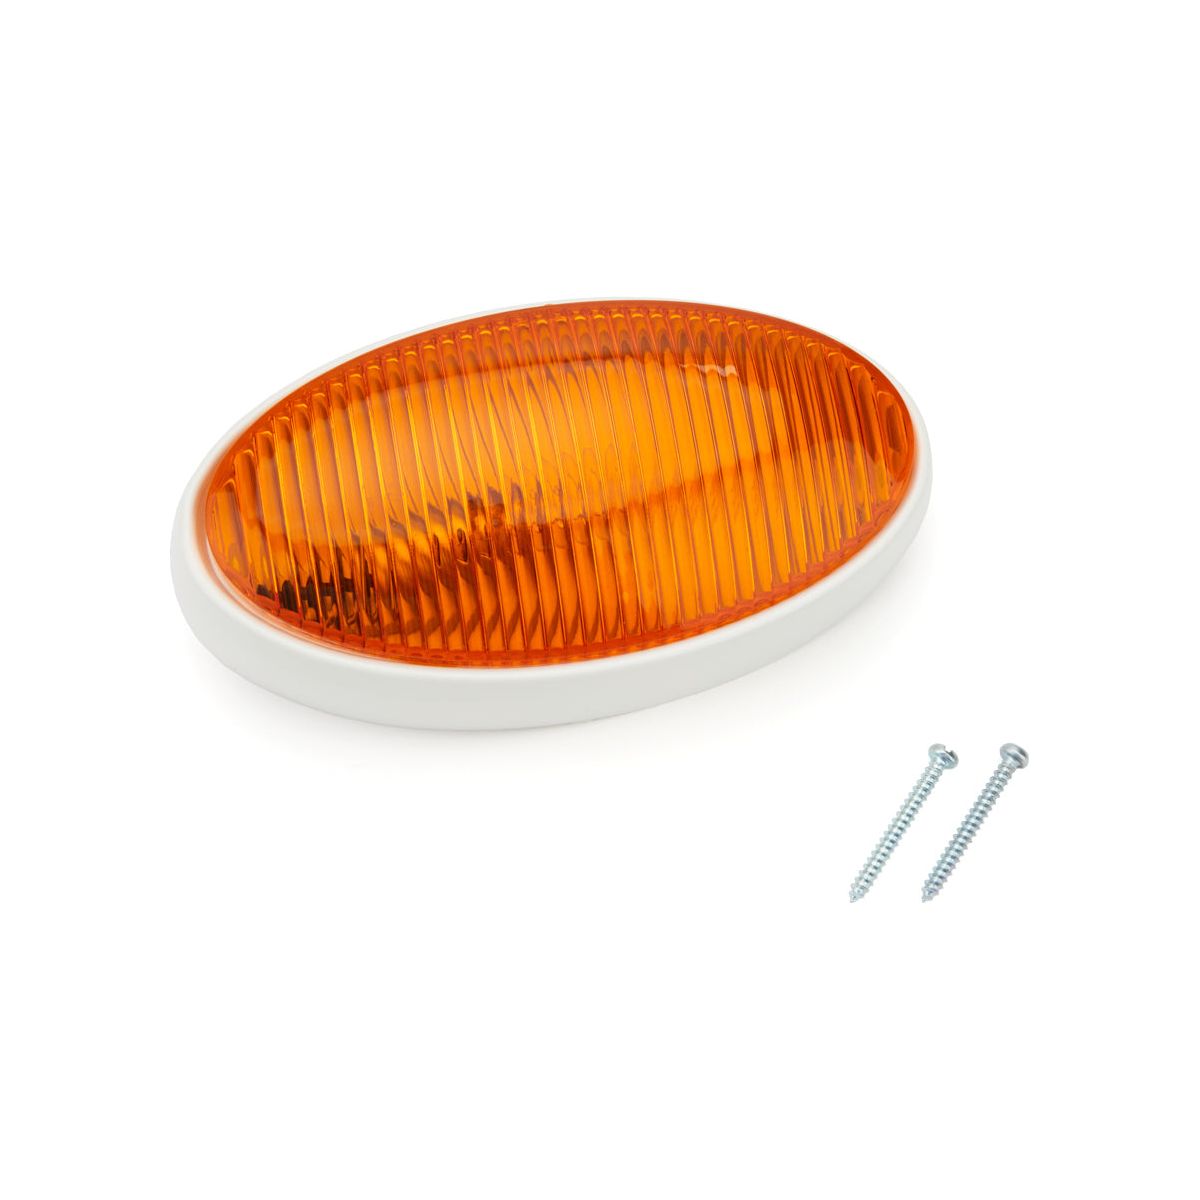 REESE 30-79-004 - Porch Light #79 Oval